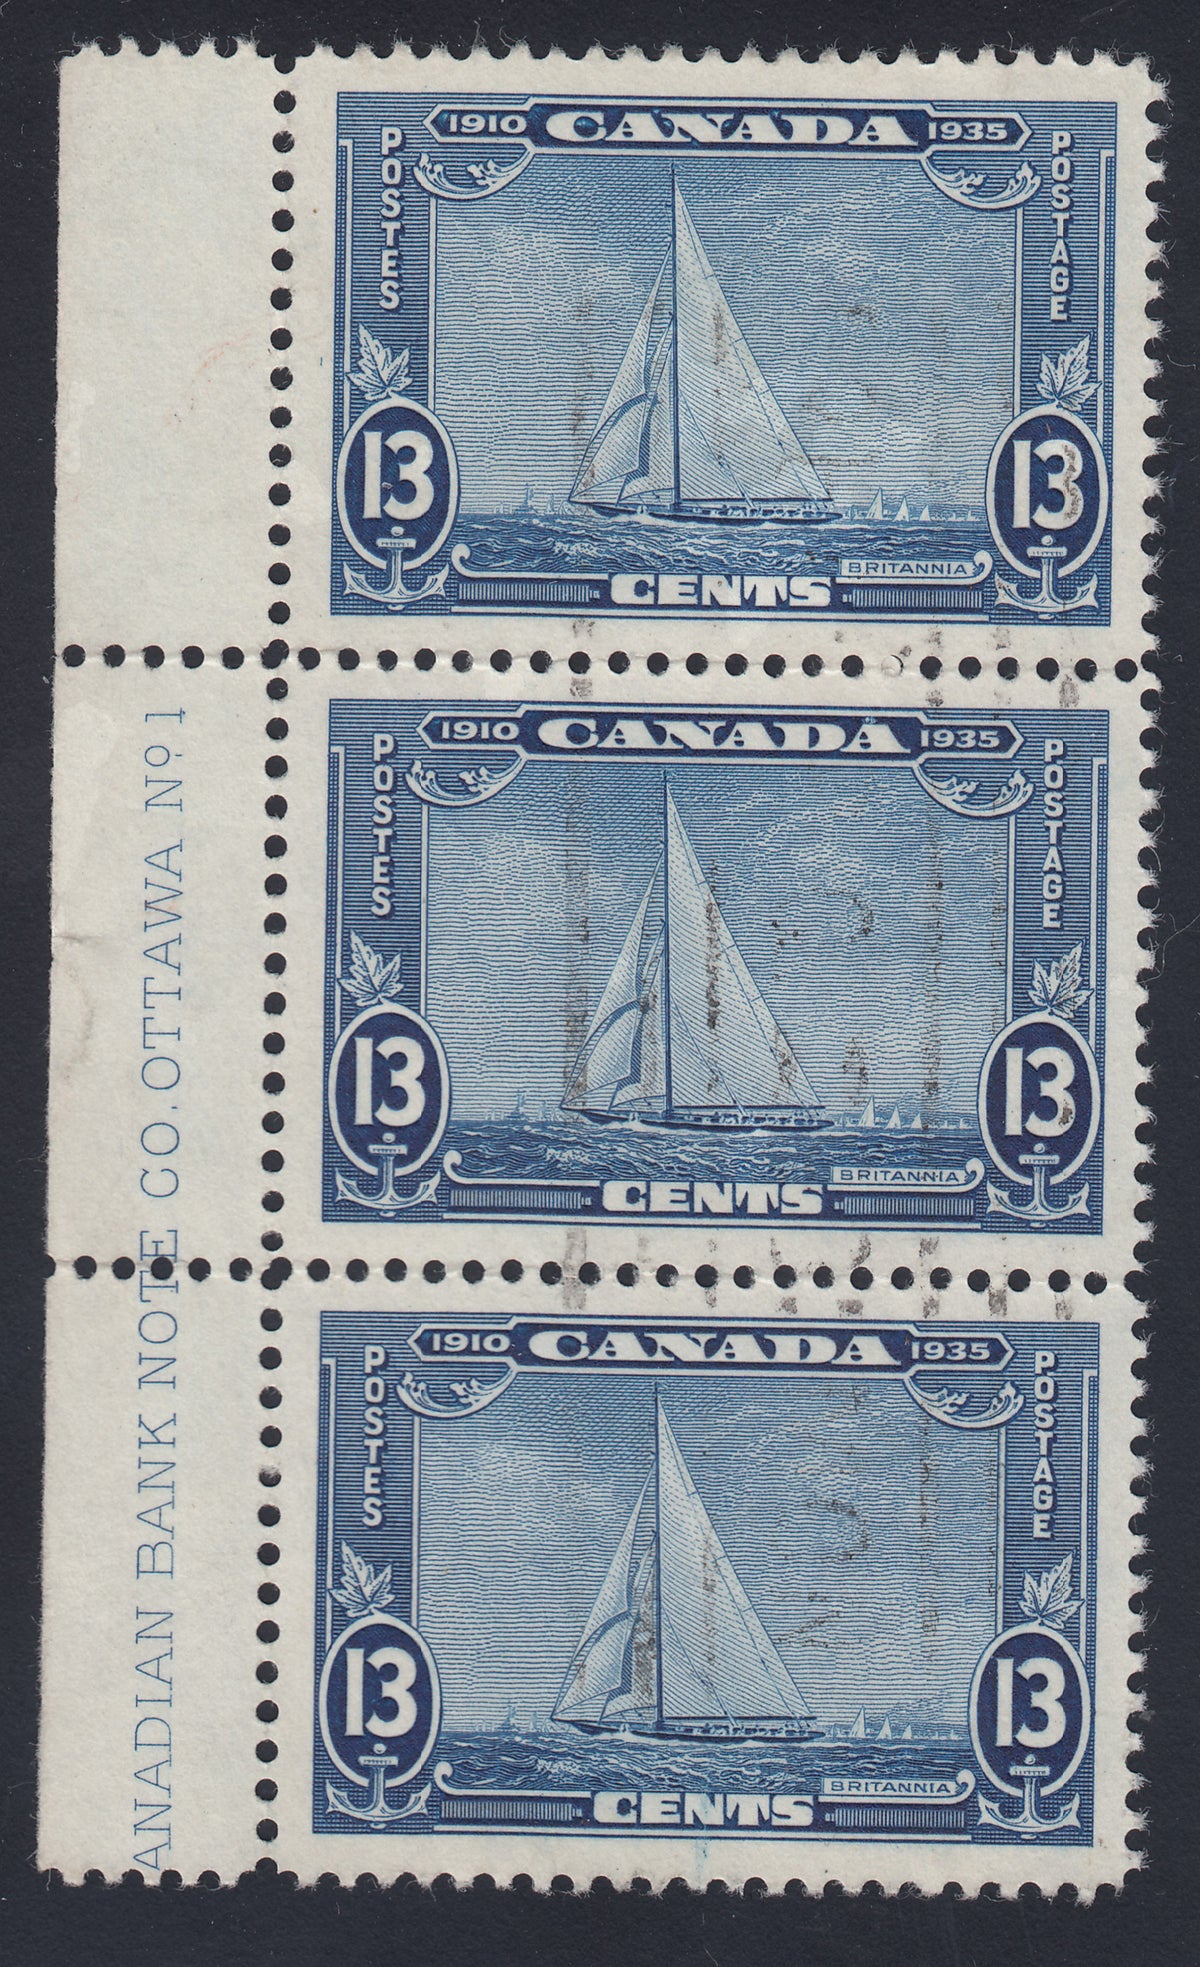 0216CA1708 - Canada #216 - Used Strip of 3. UNLISTED Re-entry